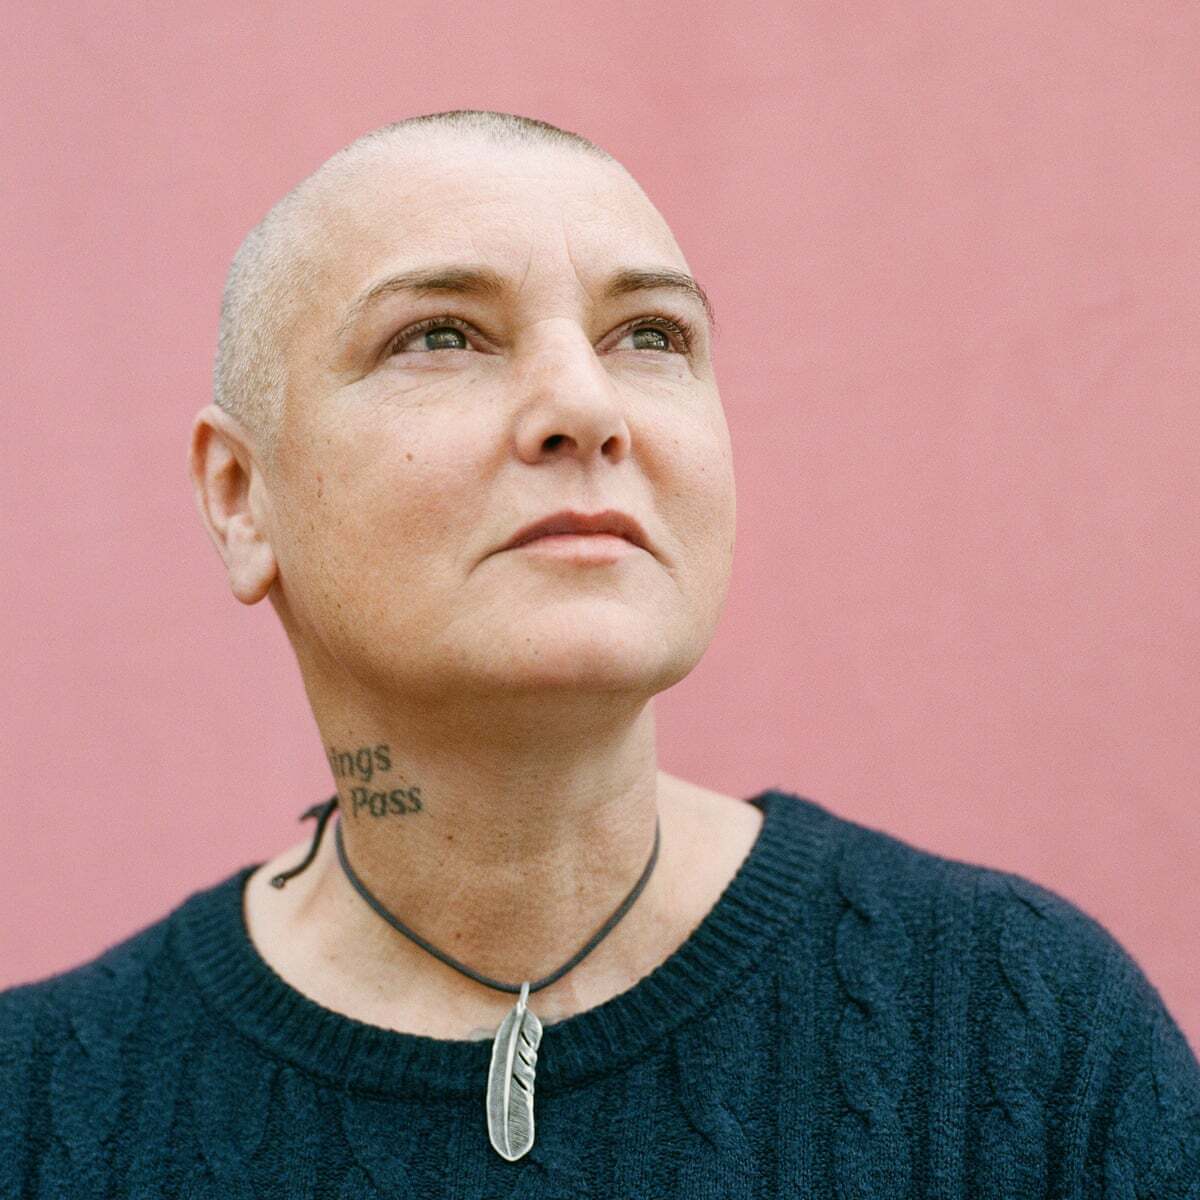 Sinead O'Connor Biography: Spouse, Age, Children, Cause of Death, Net Worth, Religion, Songs